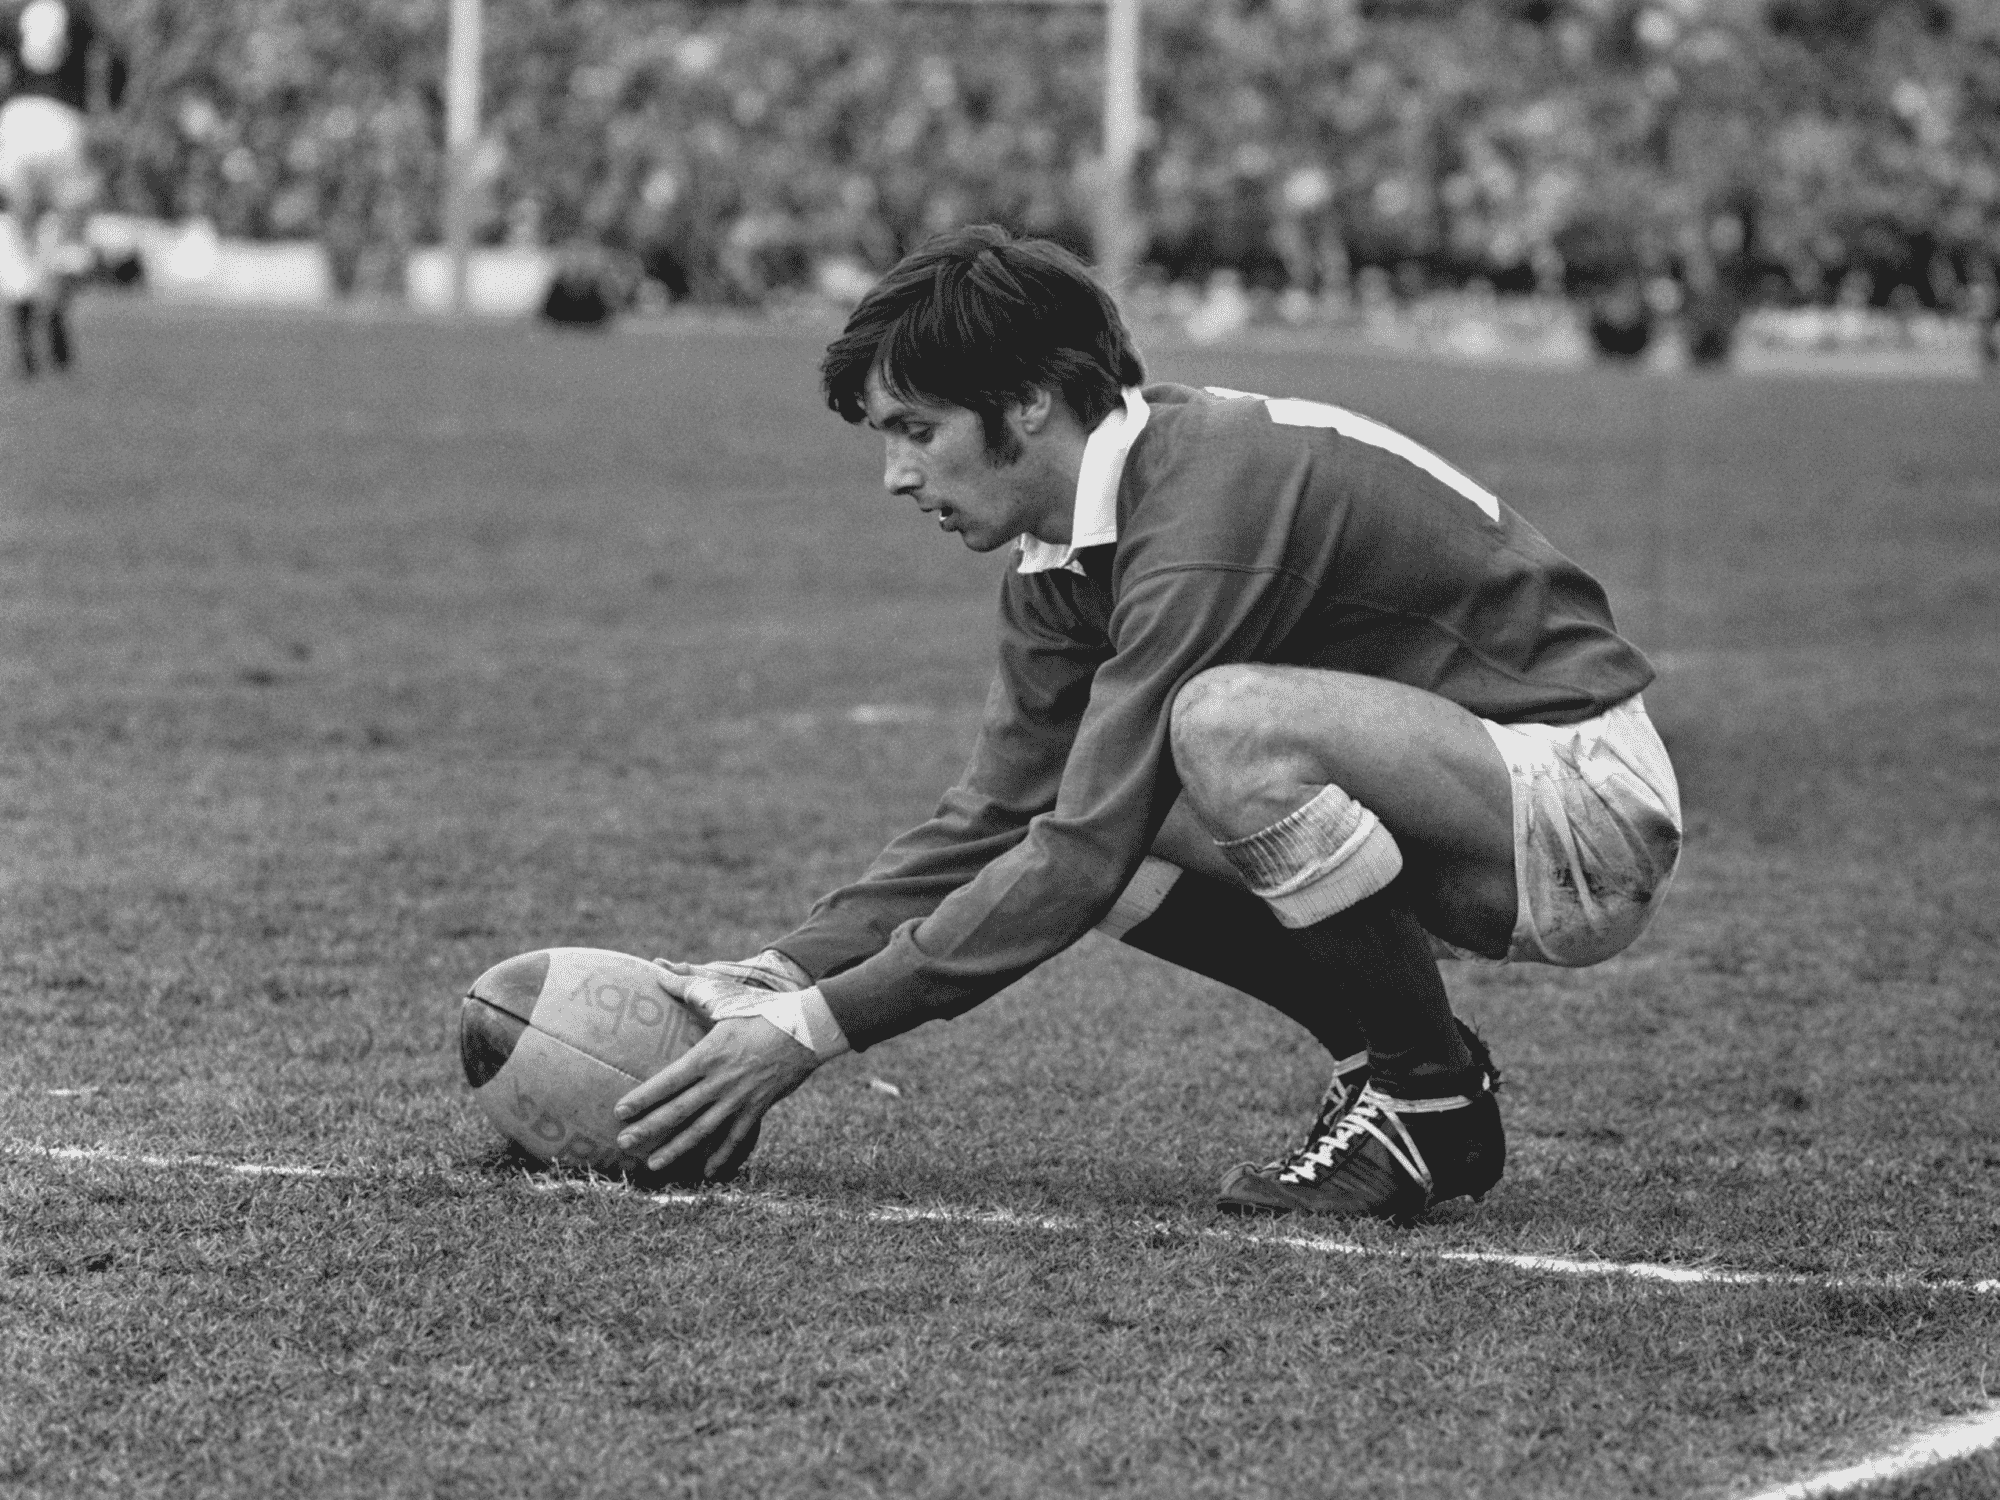 Wales's fly-half Barry John. John is considered by many to be the greatest fly-half in the history of rugby, and came to be known as "the King". (Photo by Universal/Corbis/VCG via Getty Images)